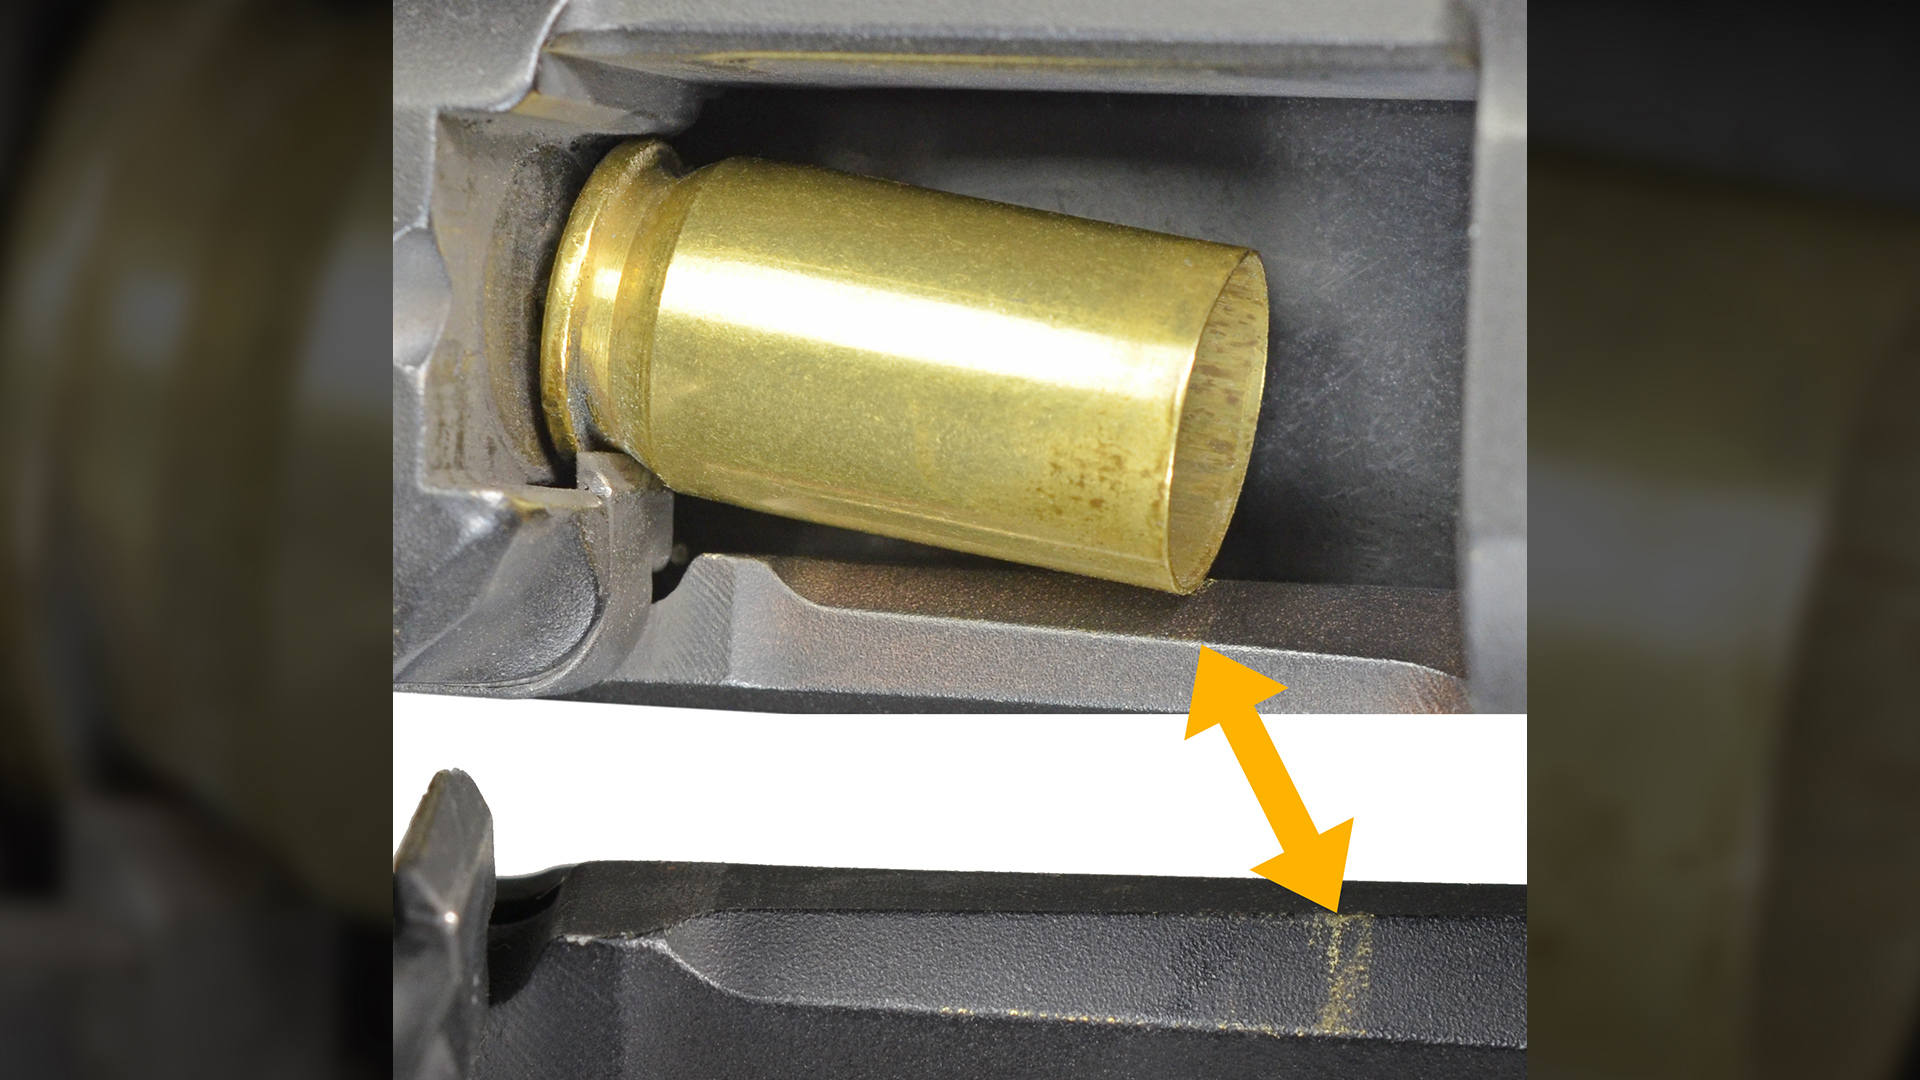 Pistol cartridge ejection angle